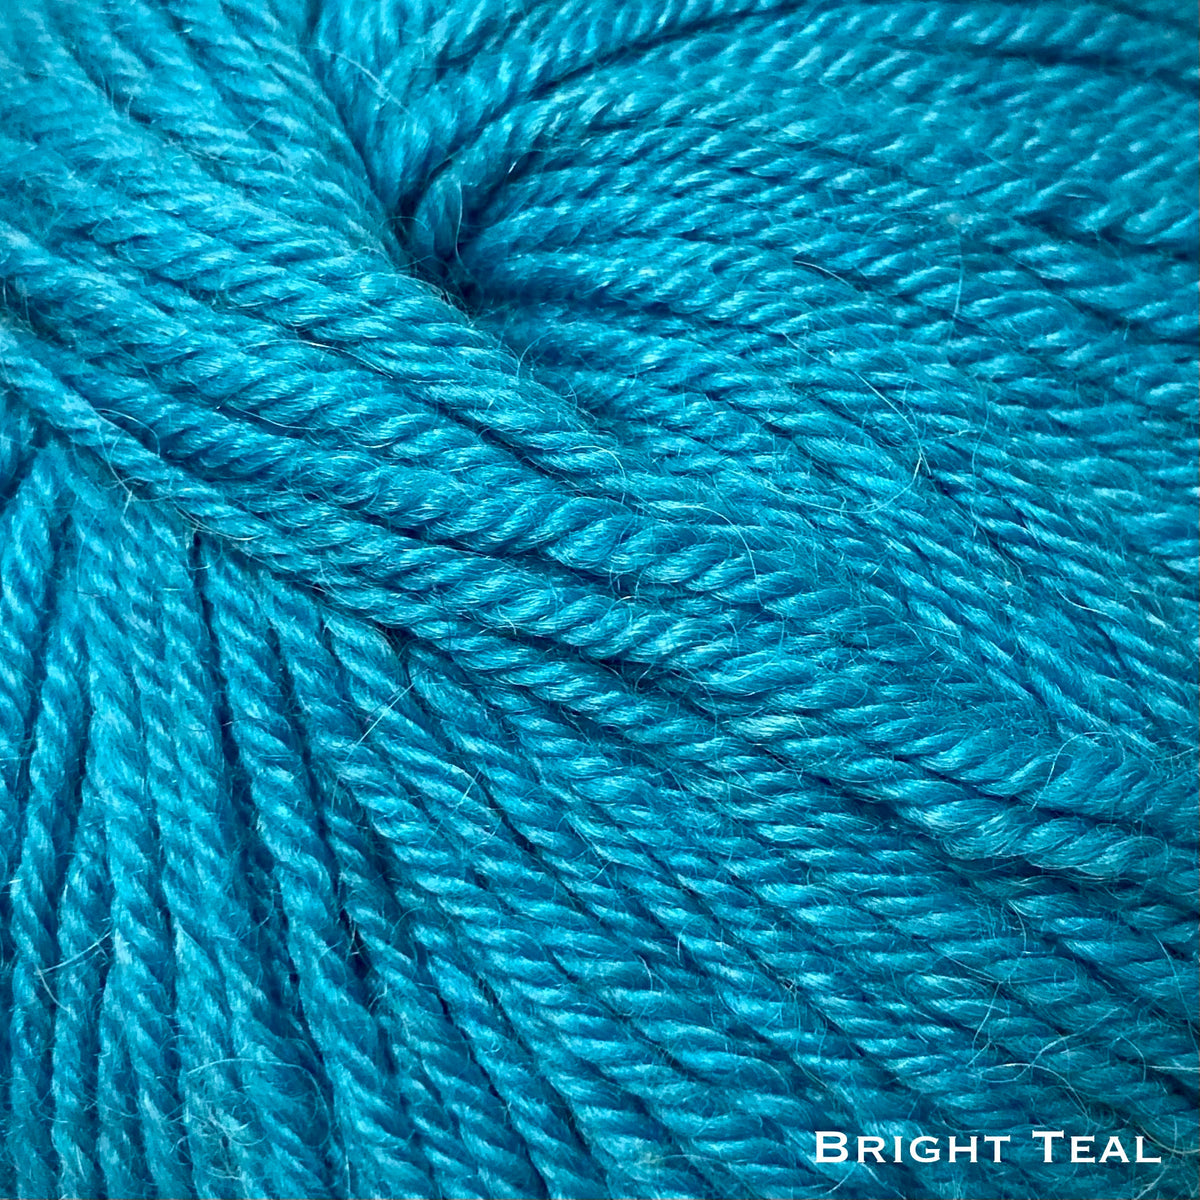 bright teal sport weight alpaca wool yarn for knitting and crochet